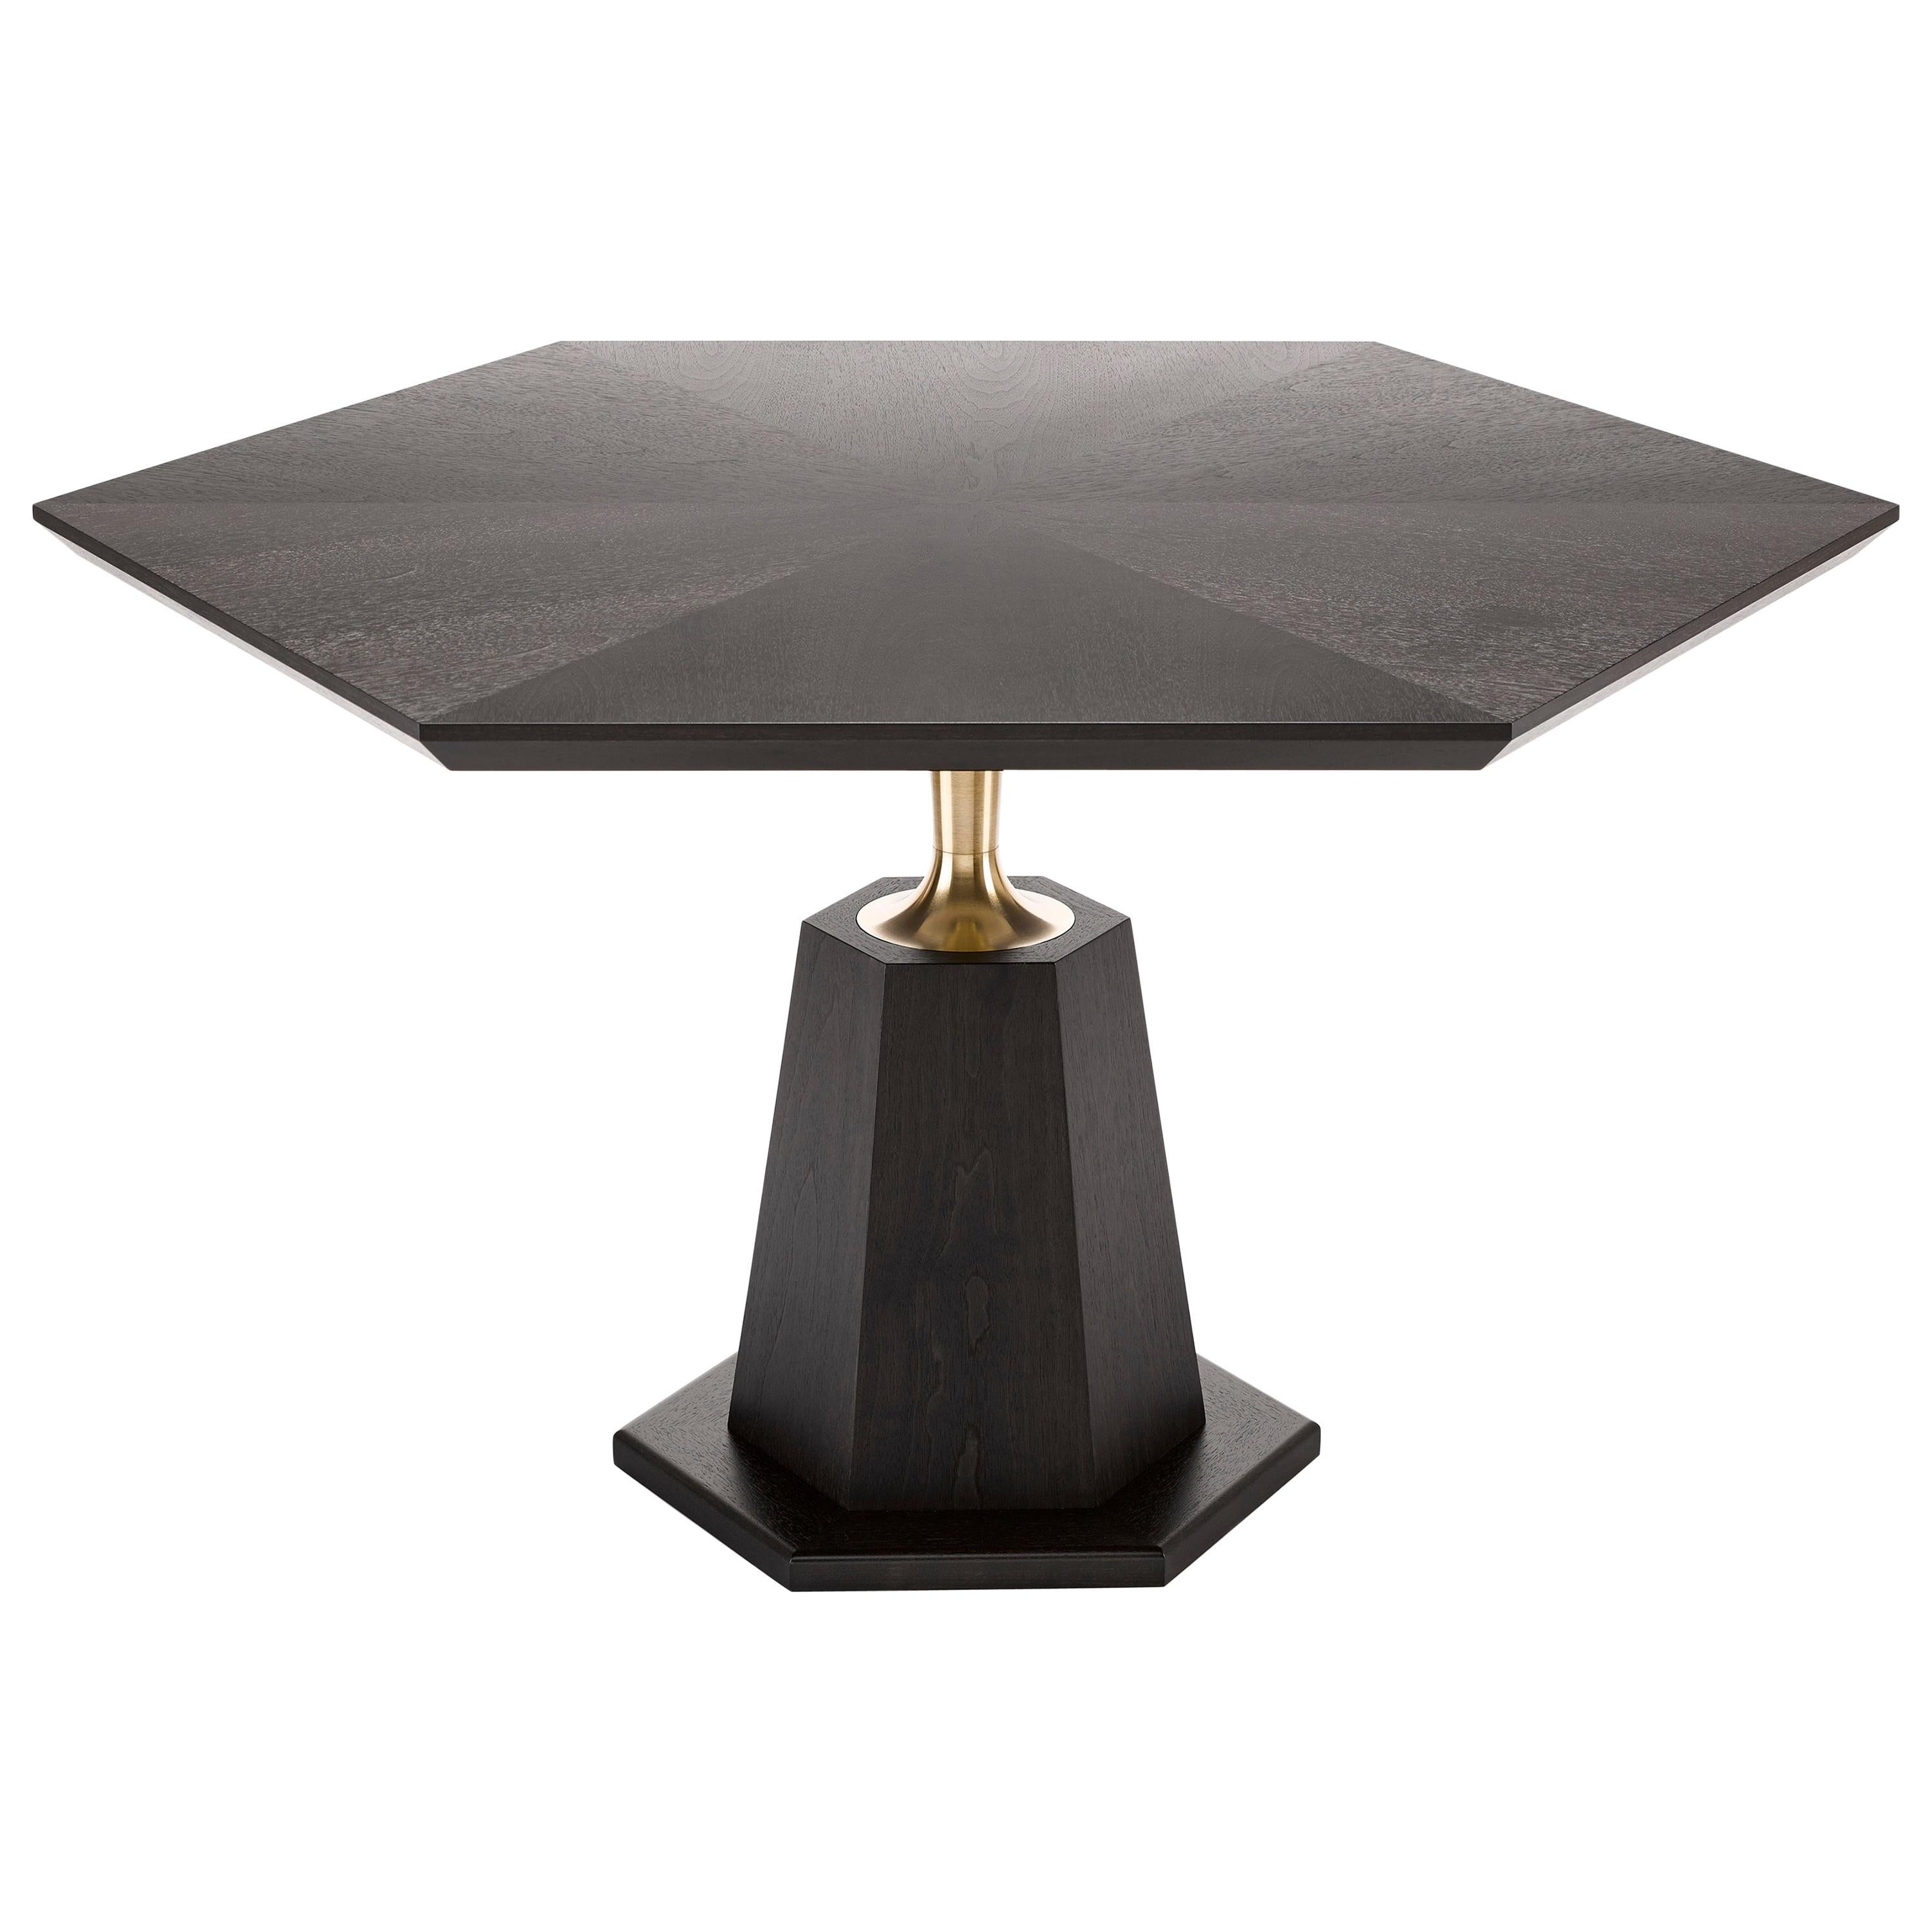 Contemporary Hex Dining Table in Oak or Walnut with Machine turned solid Brass